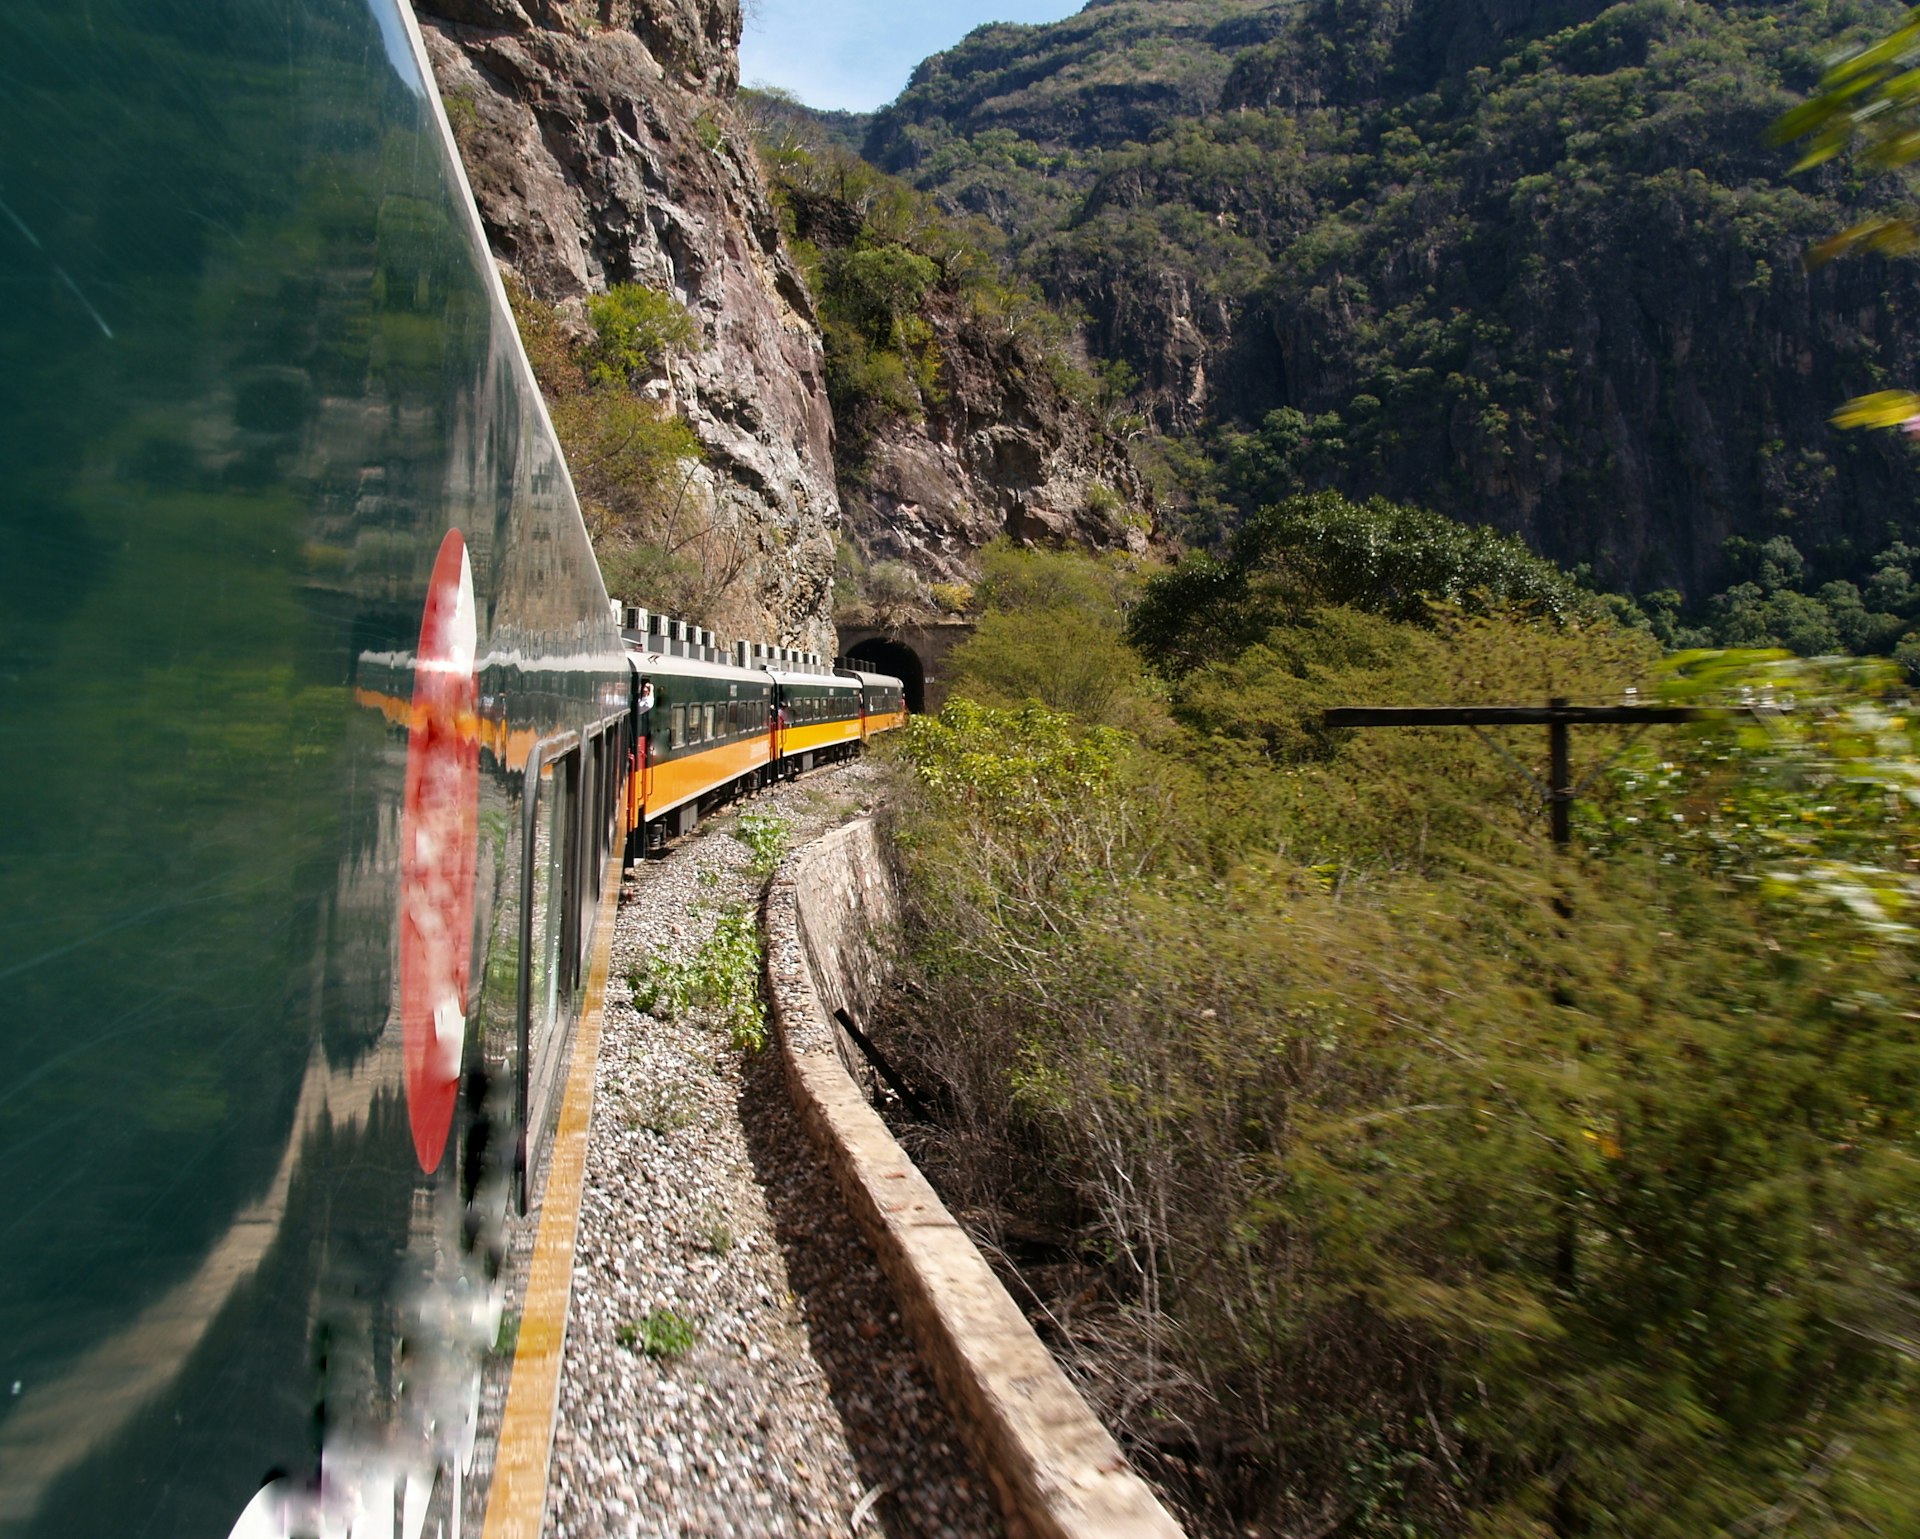 View of the side of train carriages winding their way along the Copper Canyon Railway